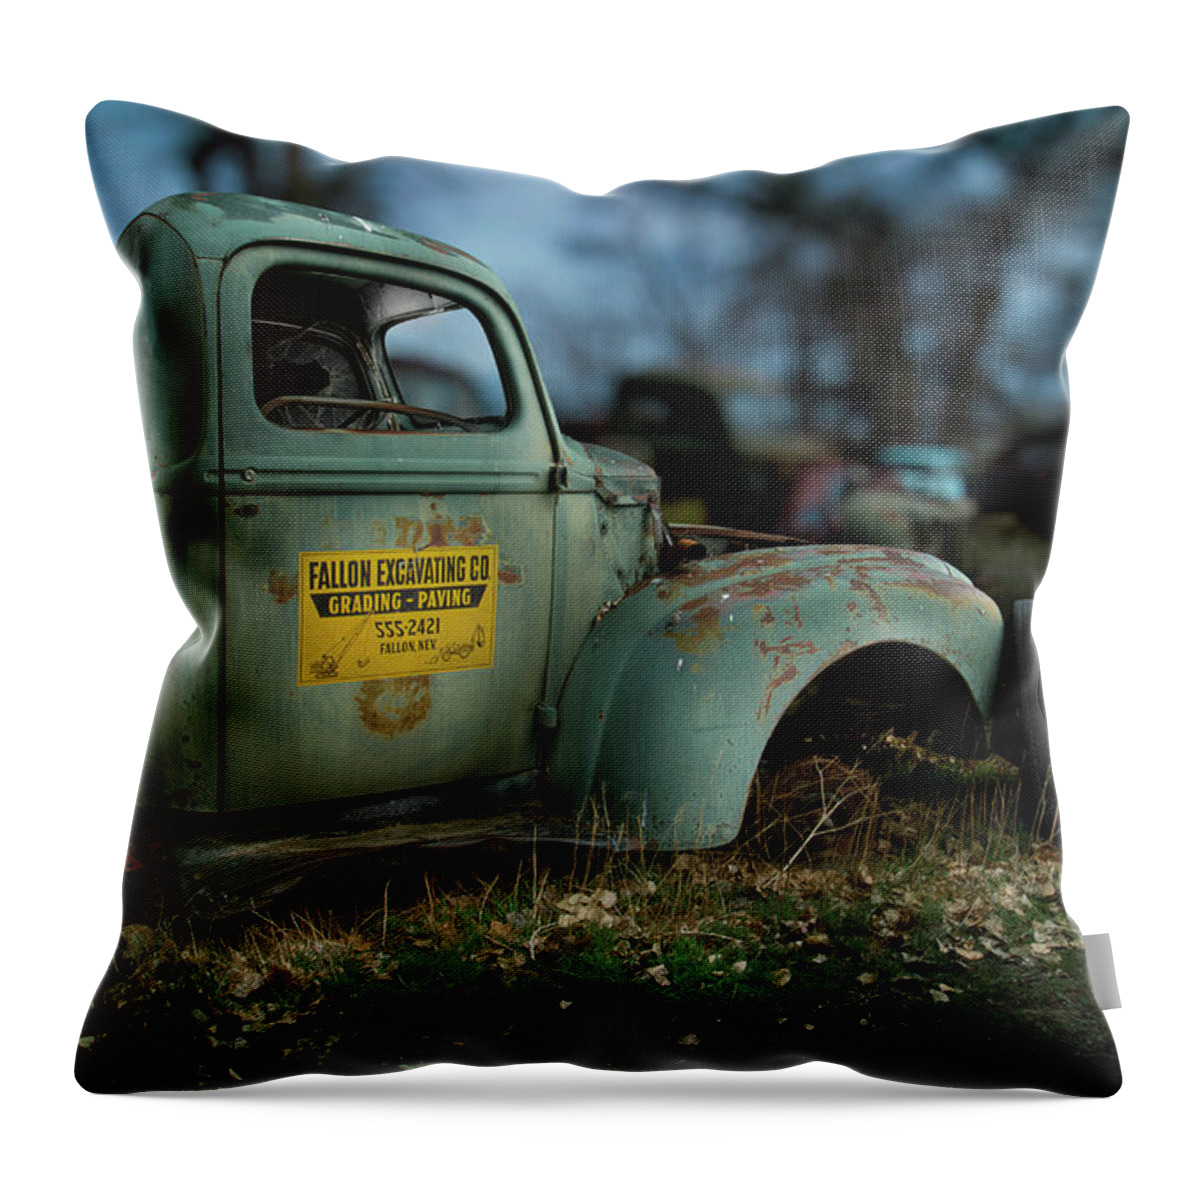 Antique Throw Pillow featuring the photograph Fallon Excavating Co. by YoPedro